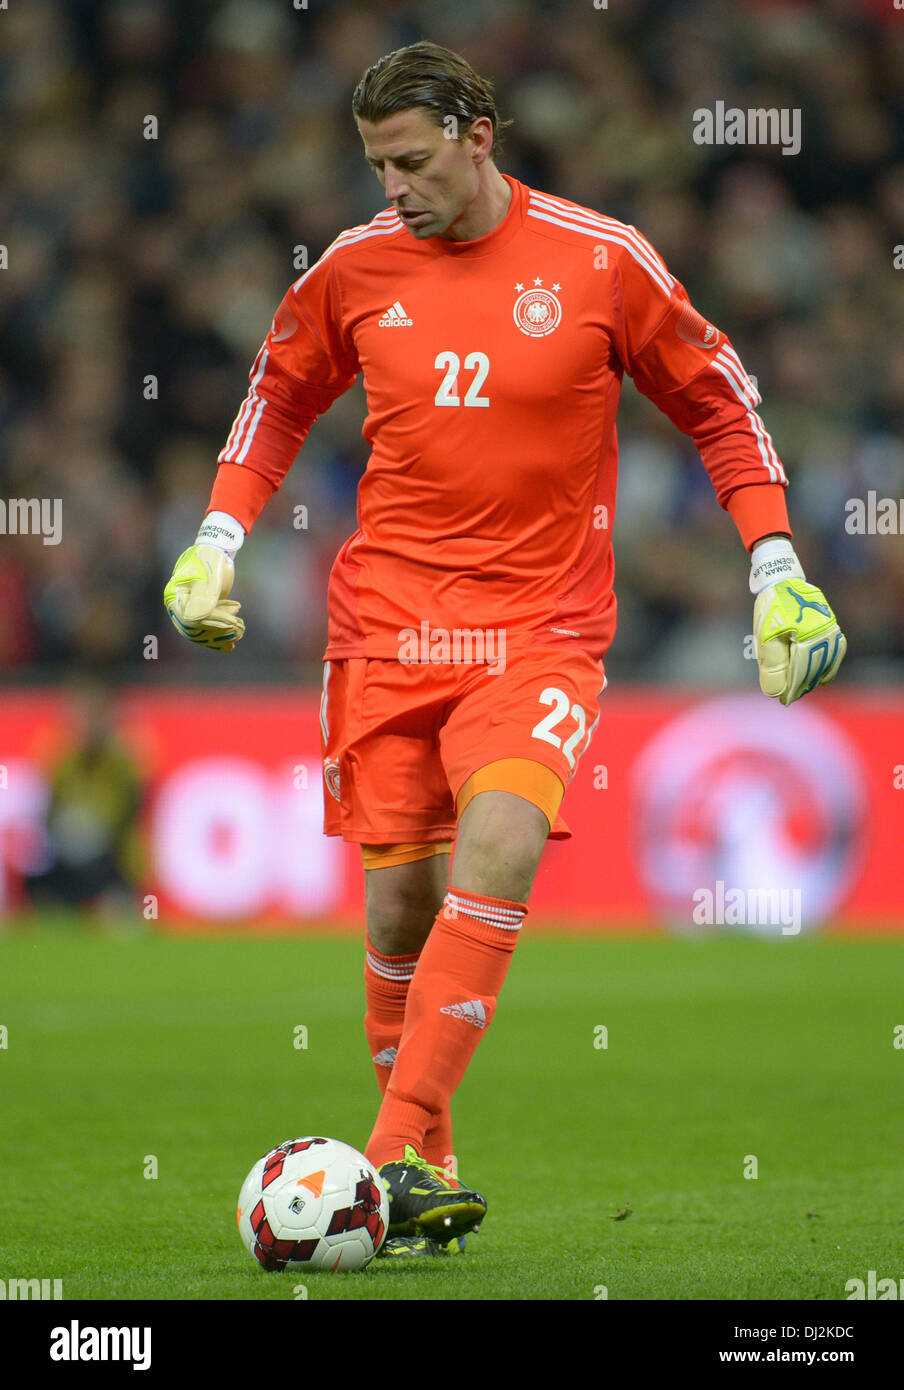 London, UK. 19th Nov, 2013. Germany's goalkeeper Roman Weidenfeller passes the ball during the friendly soccer match between England and Germany at Wembley Stadium in London, England, 19 November 2013. Photo: Andreas Gebert/dpa/Alamy Live News Stock Photo